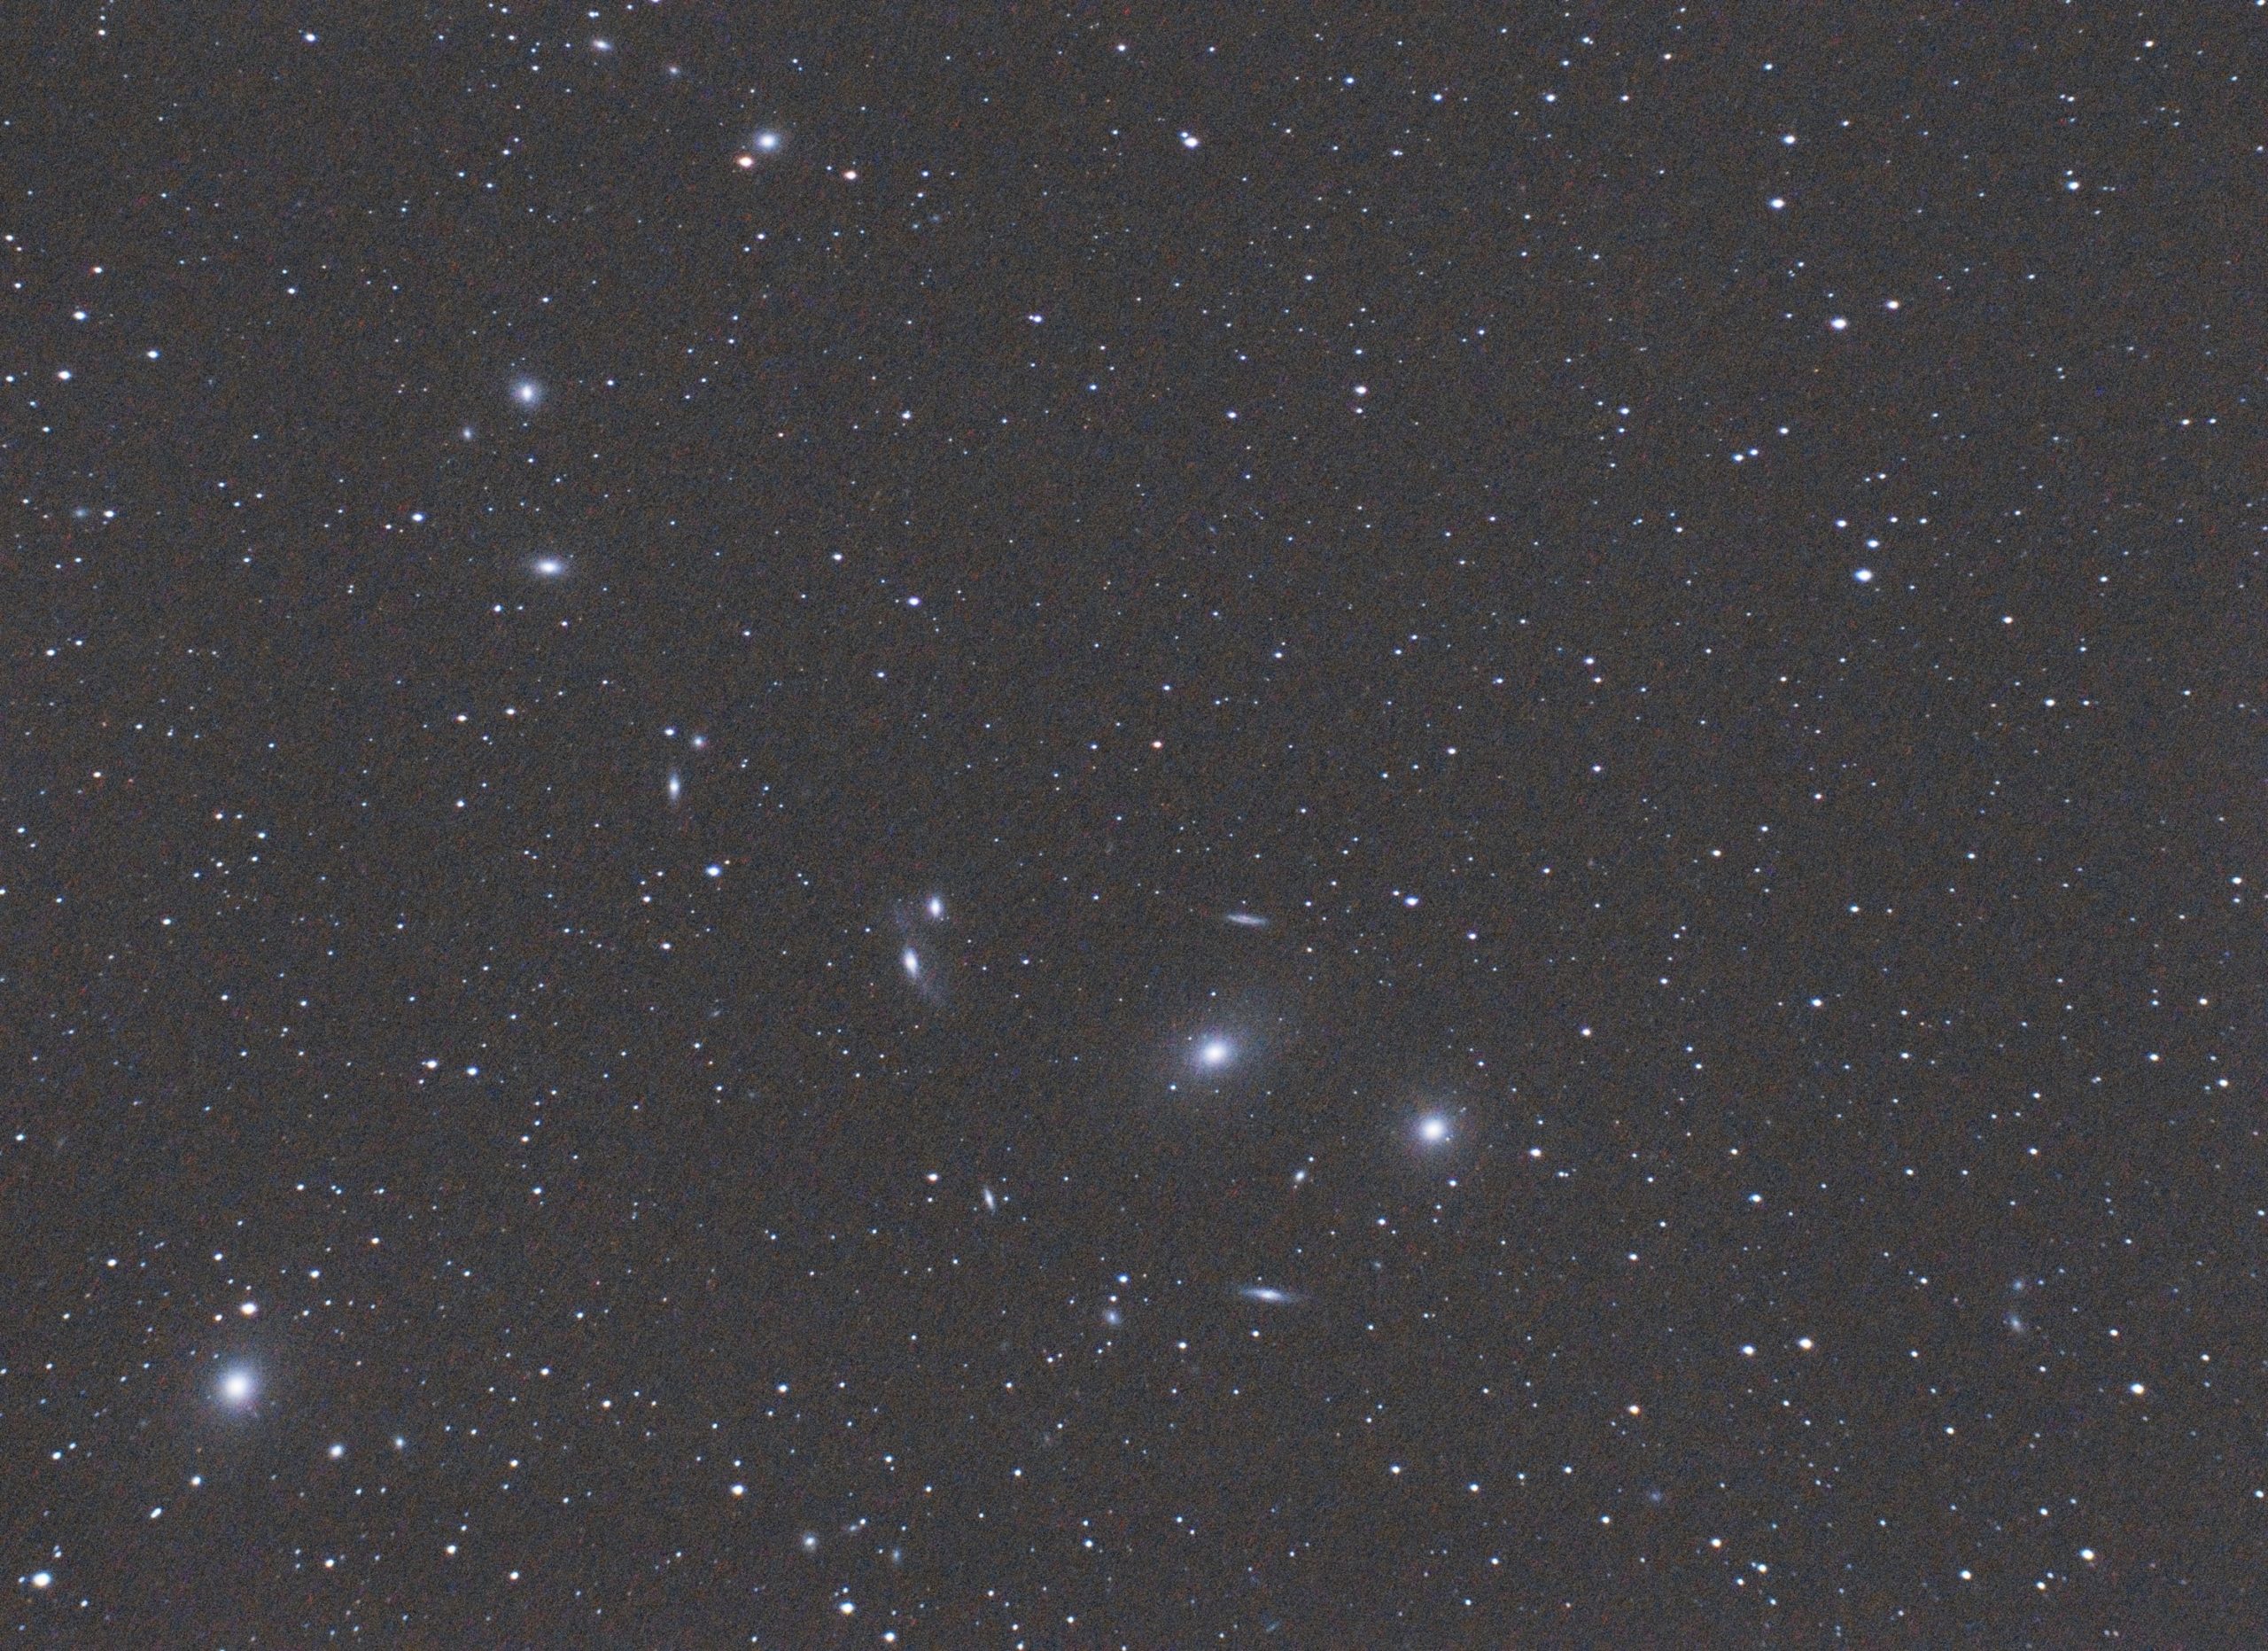 Markarian's Chain, an easy Spring astrophotography target.